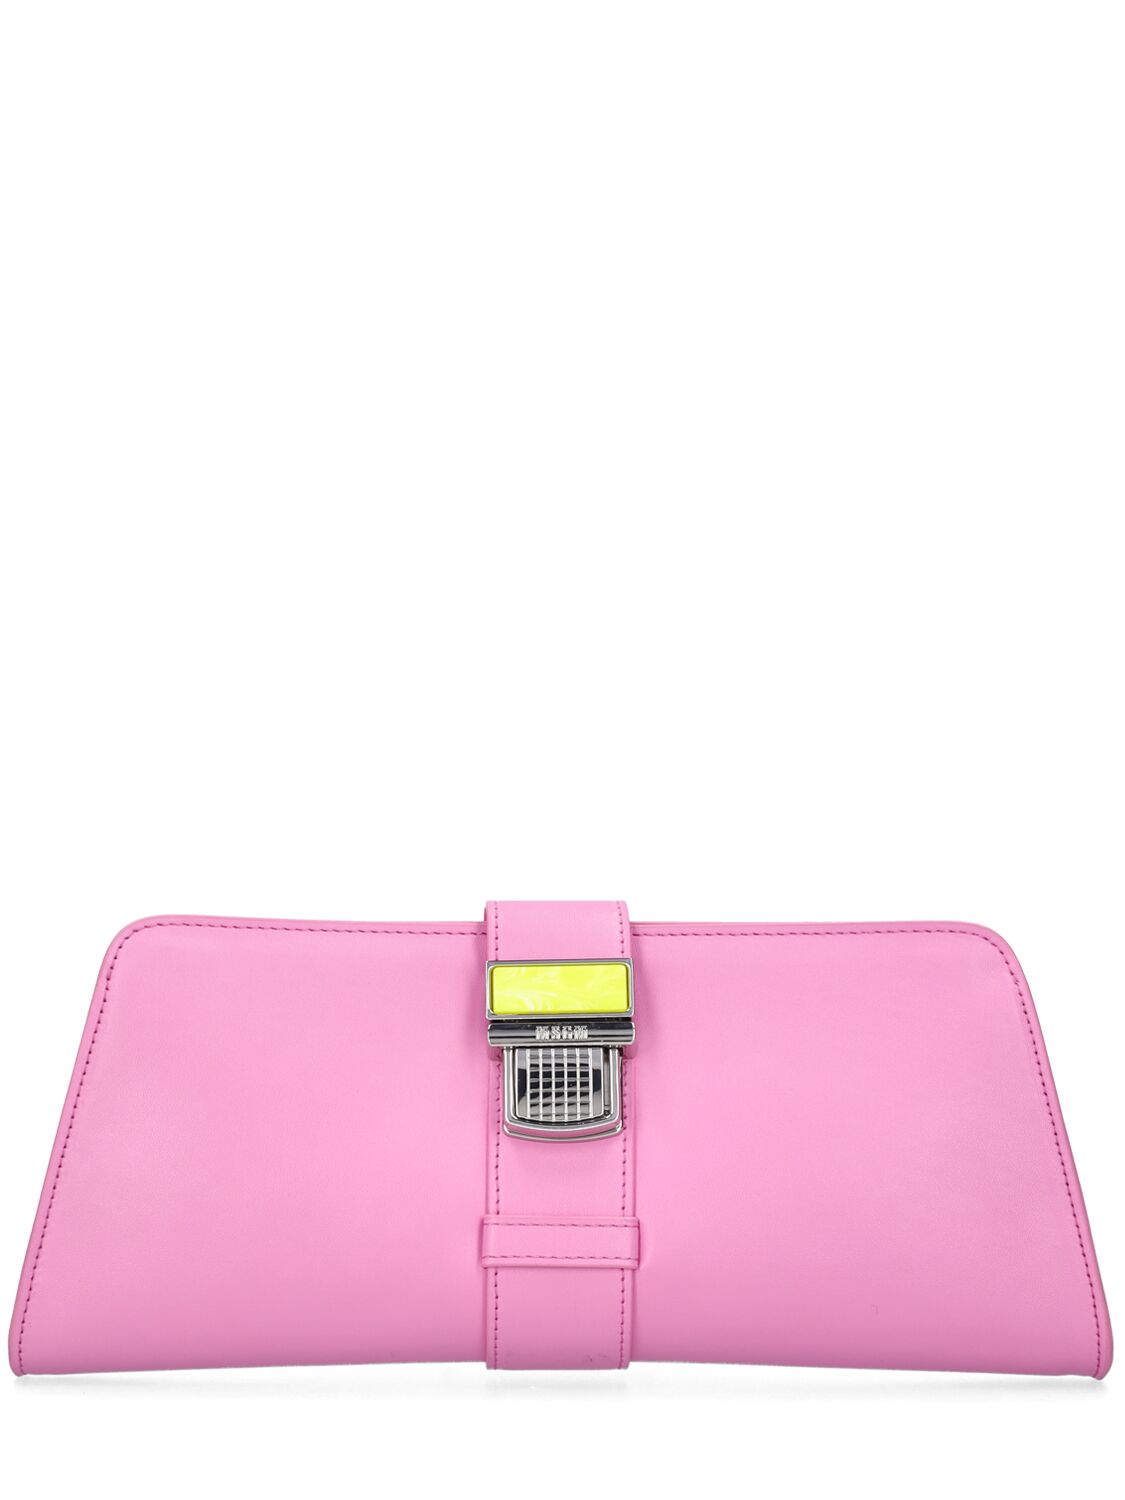 Msgm Clic Elongated Faux Leather Clutch In Pink